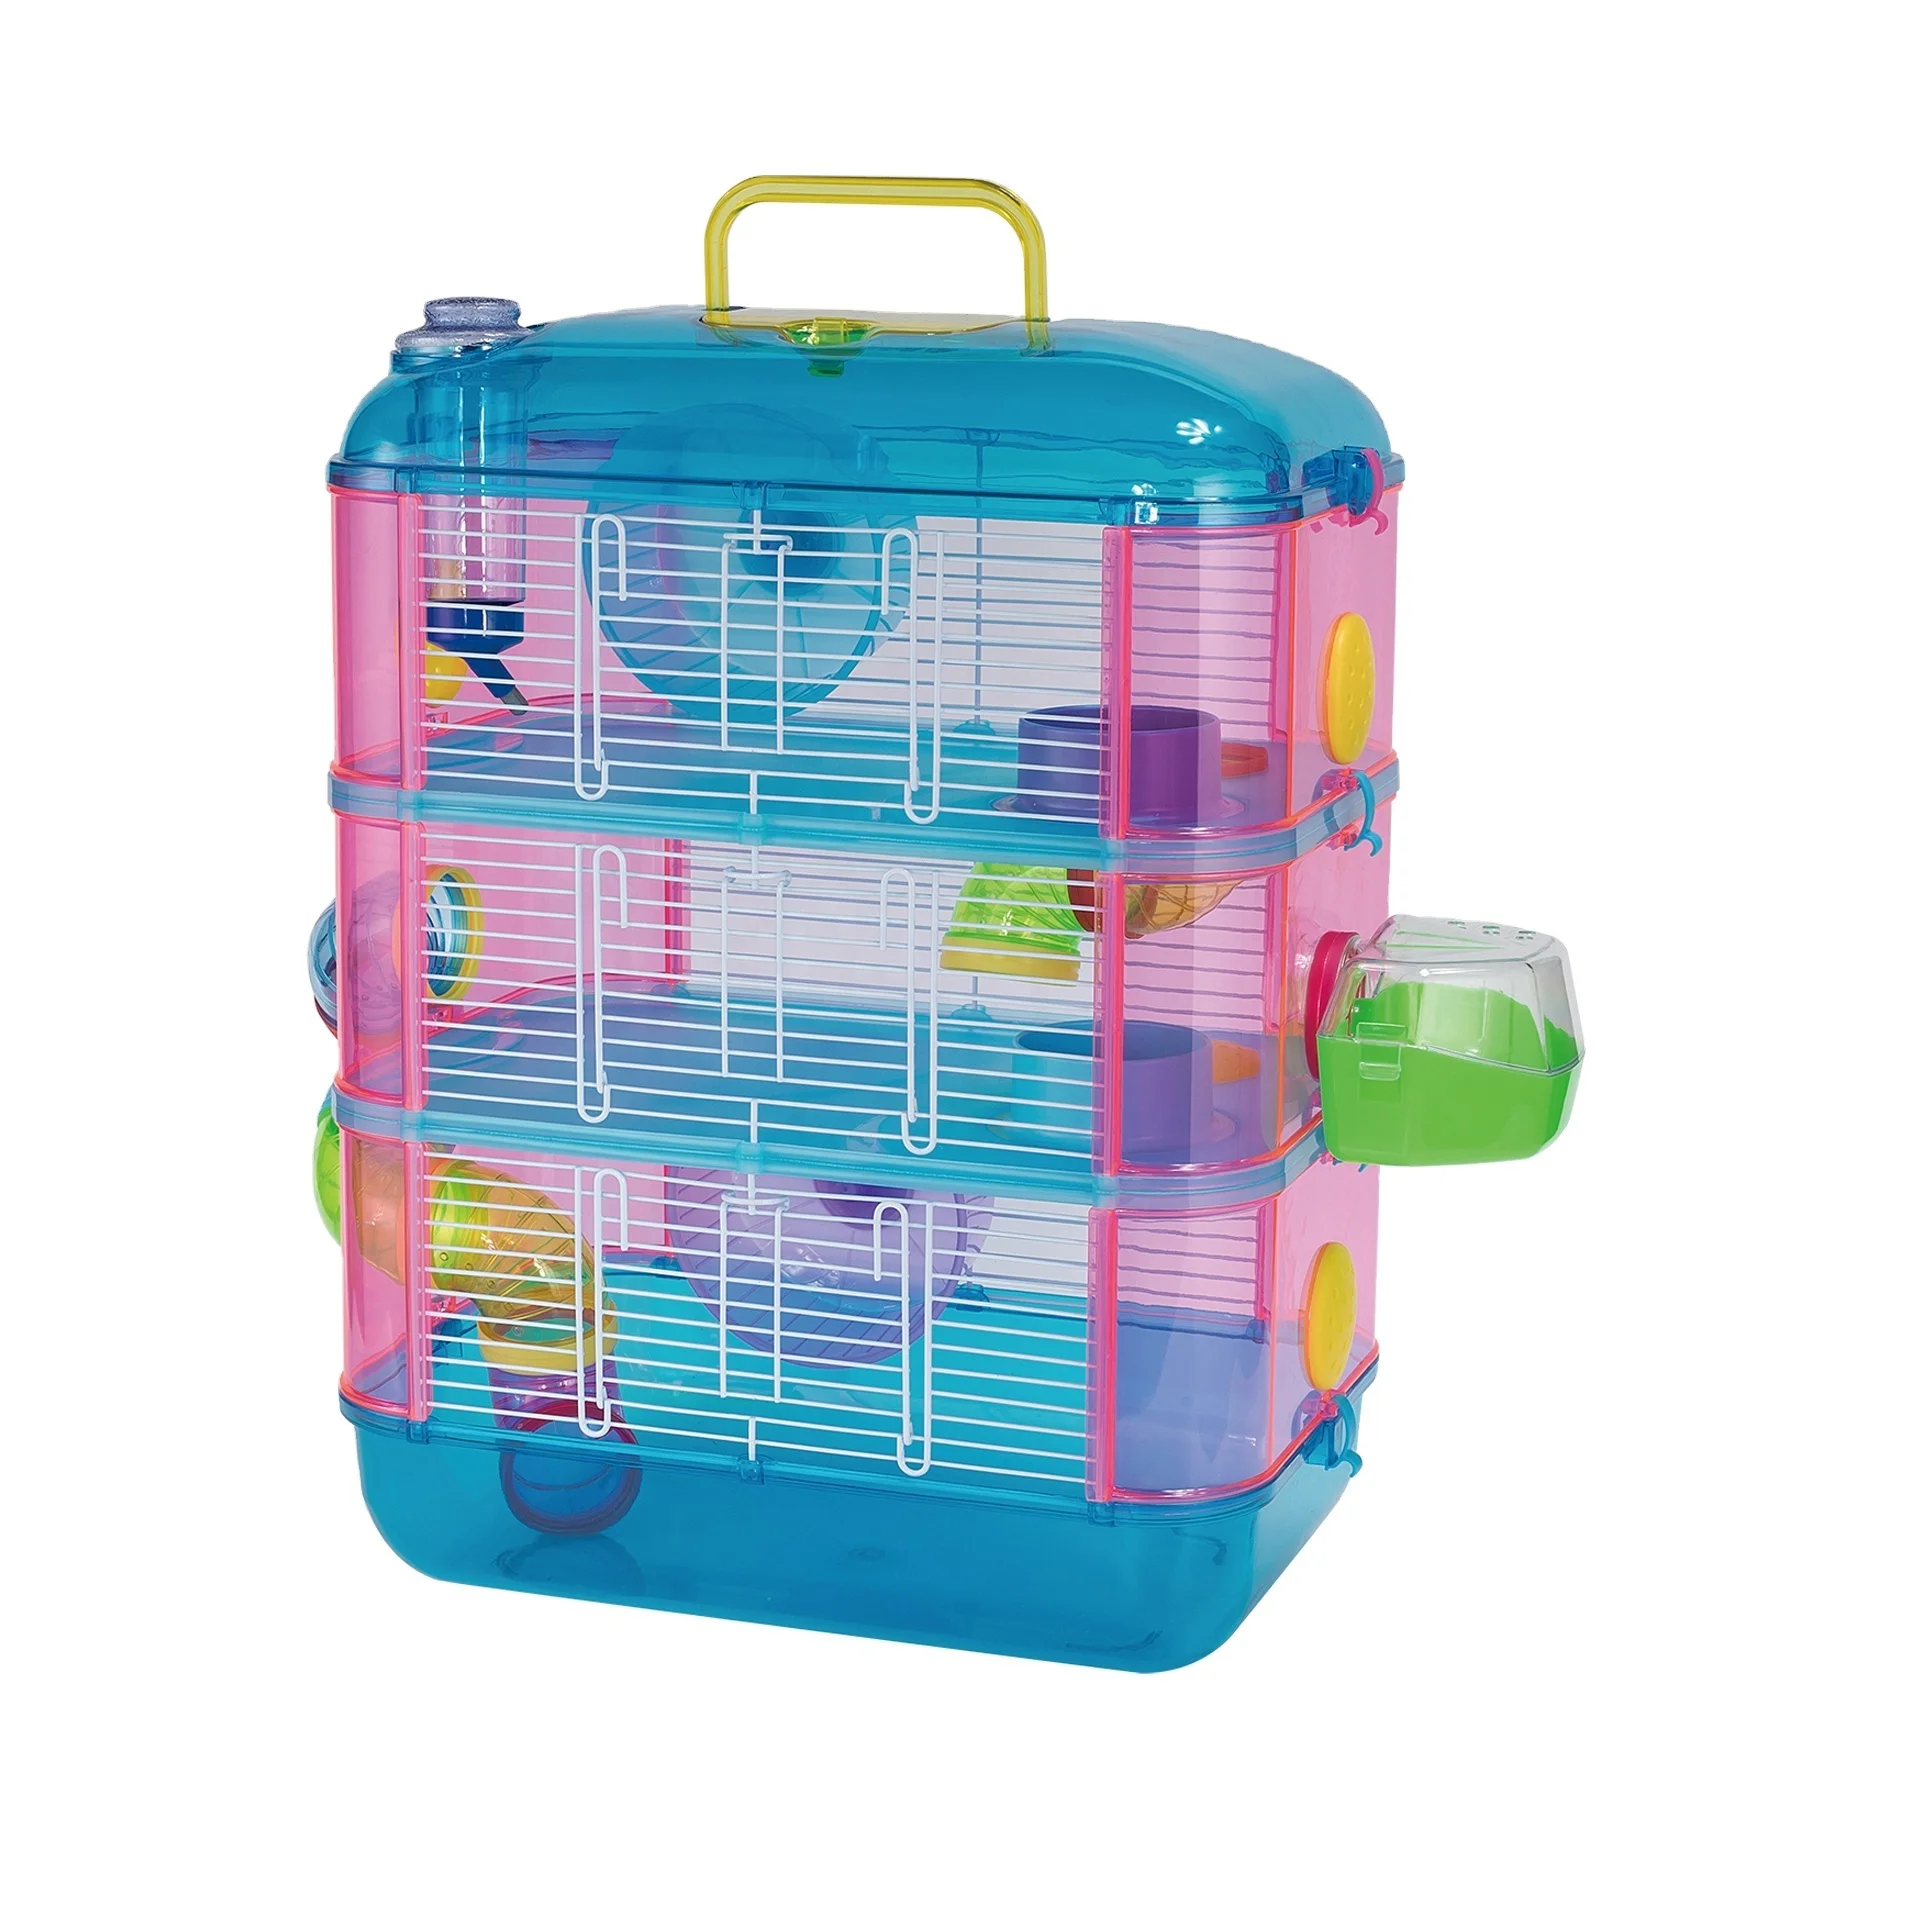 ORIENPET & OASISPET Plastic colorful transparent hamster cage Ready stocks OPT29649 Pet cage products